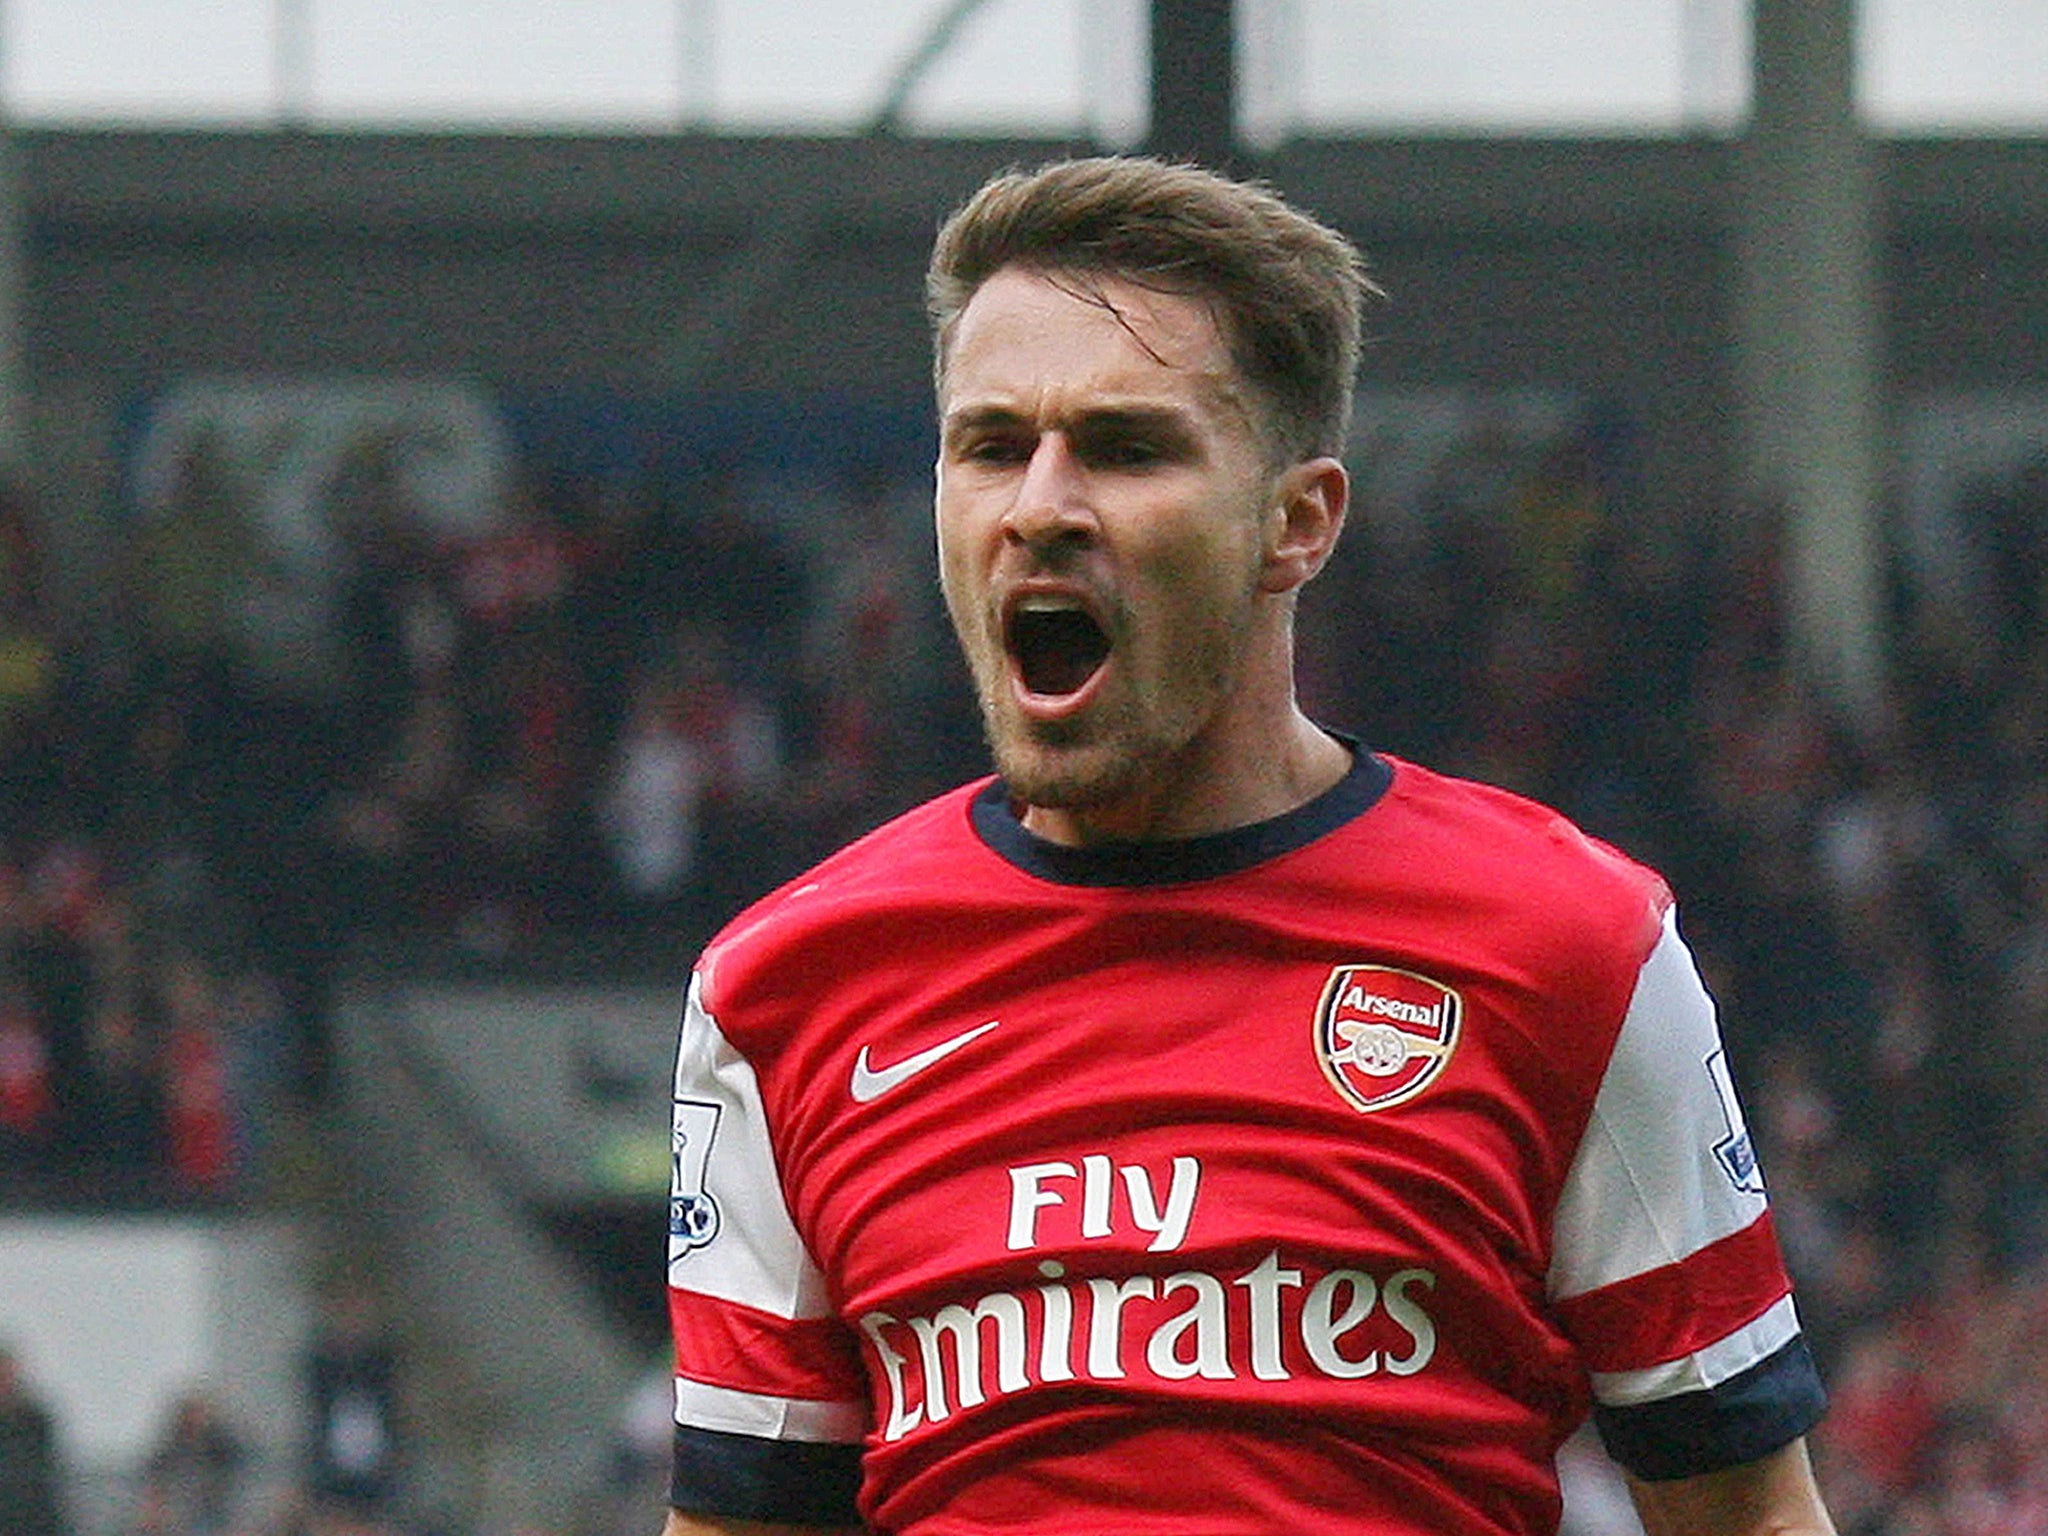 Aaron Ramsey is likely to be out for six to eight weeks